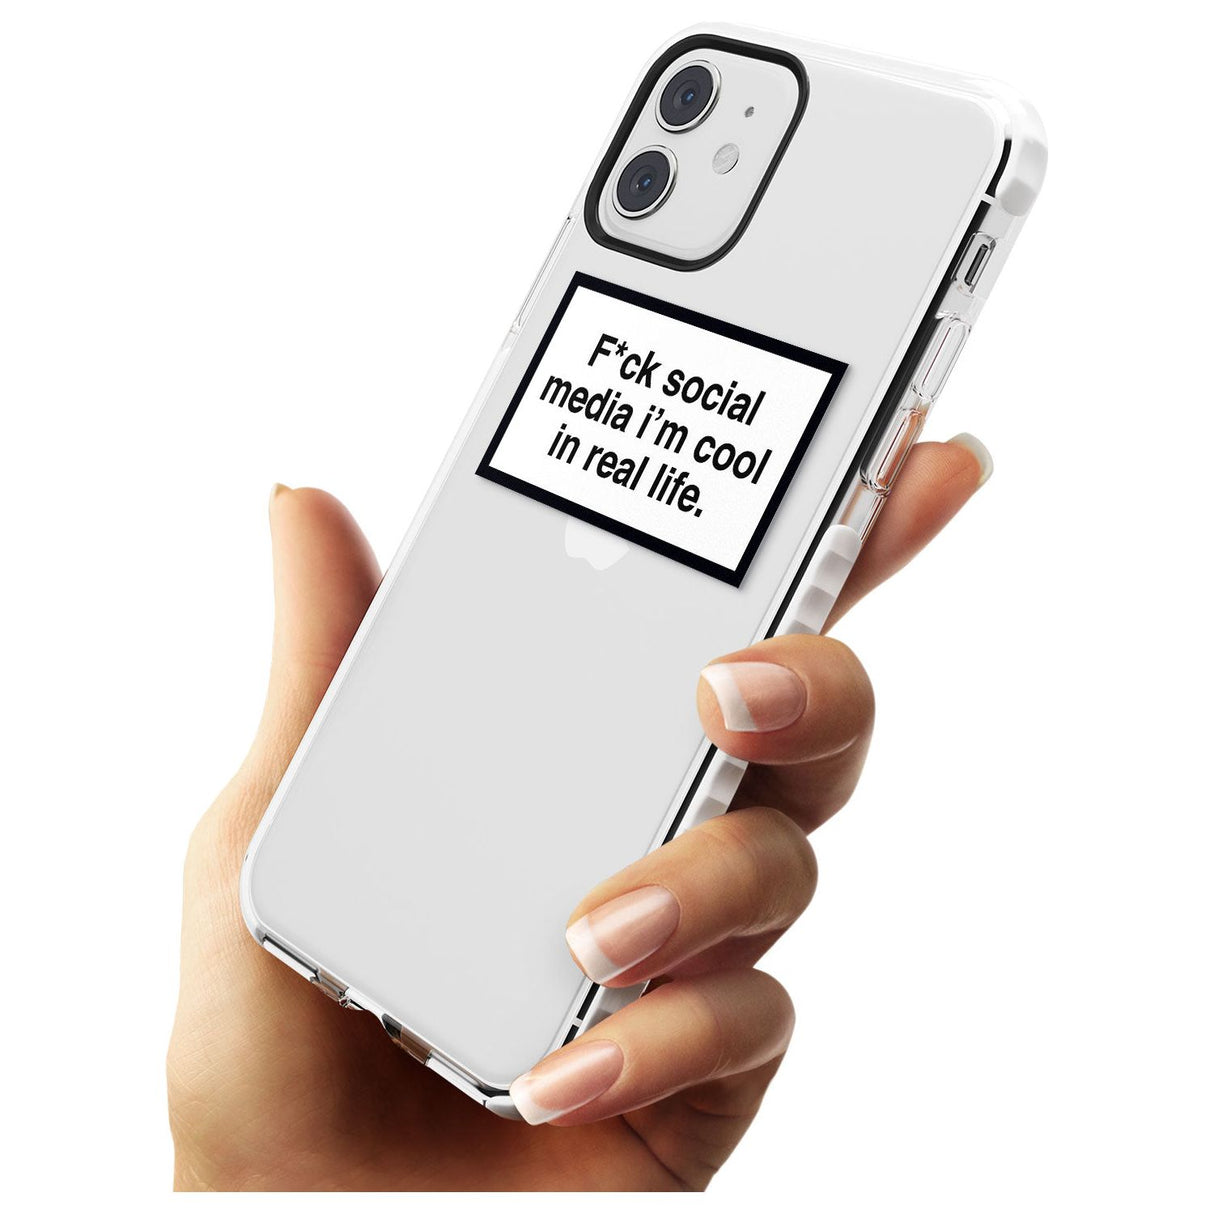 F*ck social media I'm cool in real life Slim TPU Phone Case for iPhone 11